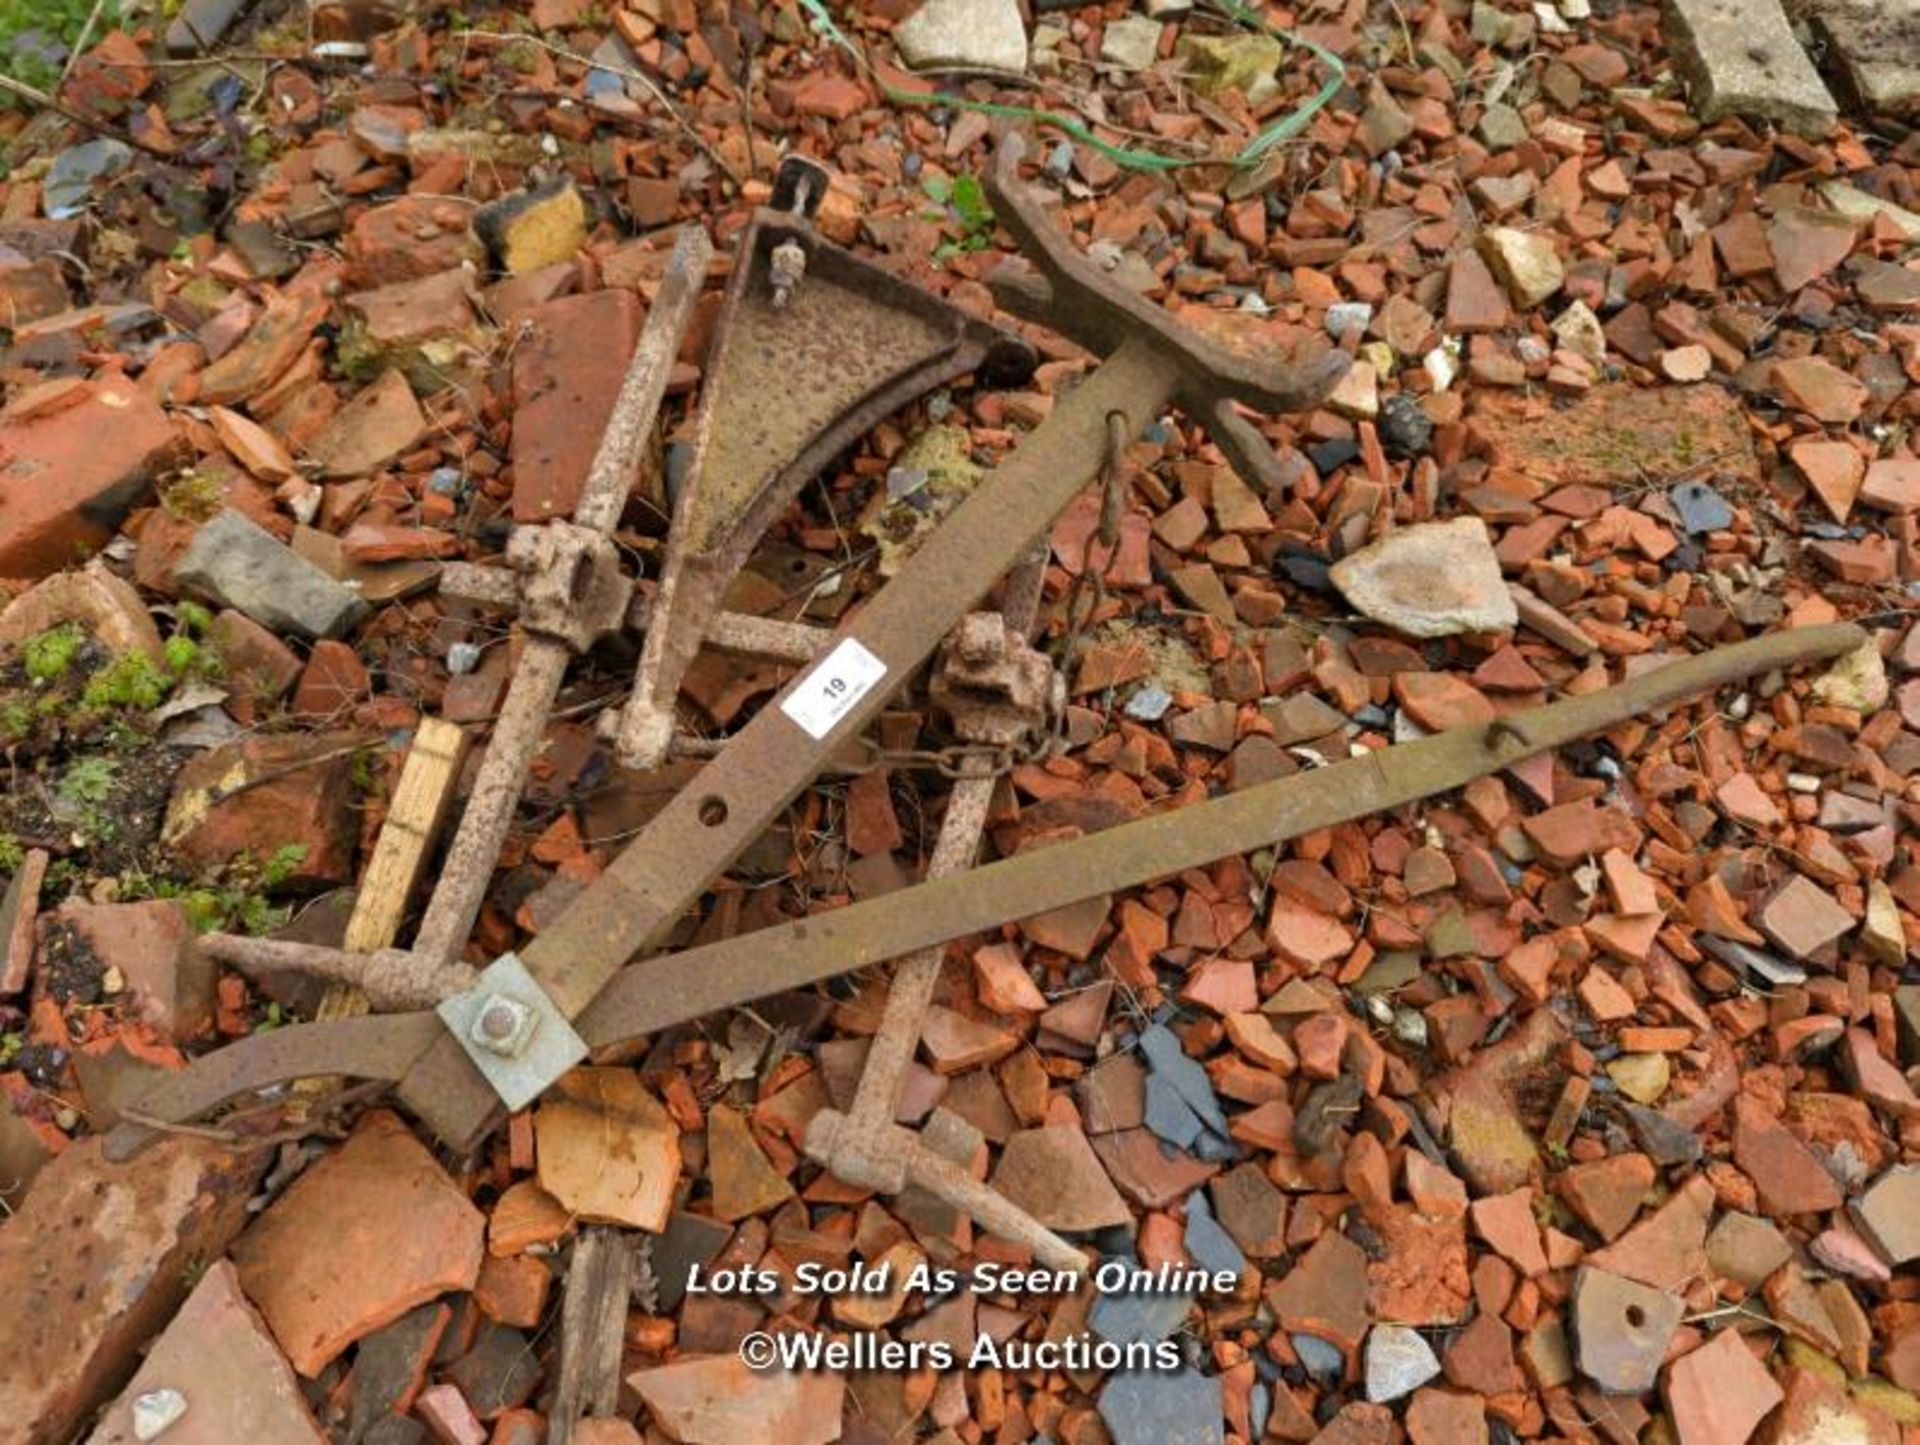 *CART JACK AND LARGE WROUGHT IRON HINGES / ALL LOTS ARE LOCATED AT AUTHENTIC RECLAMATION TN5 7EF